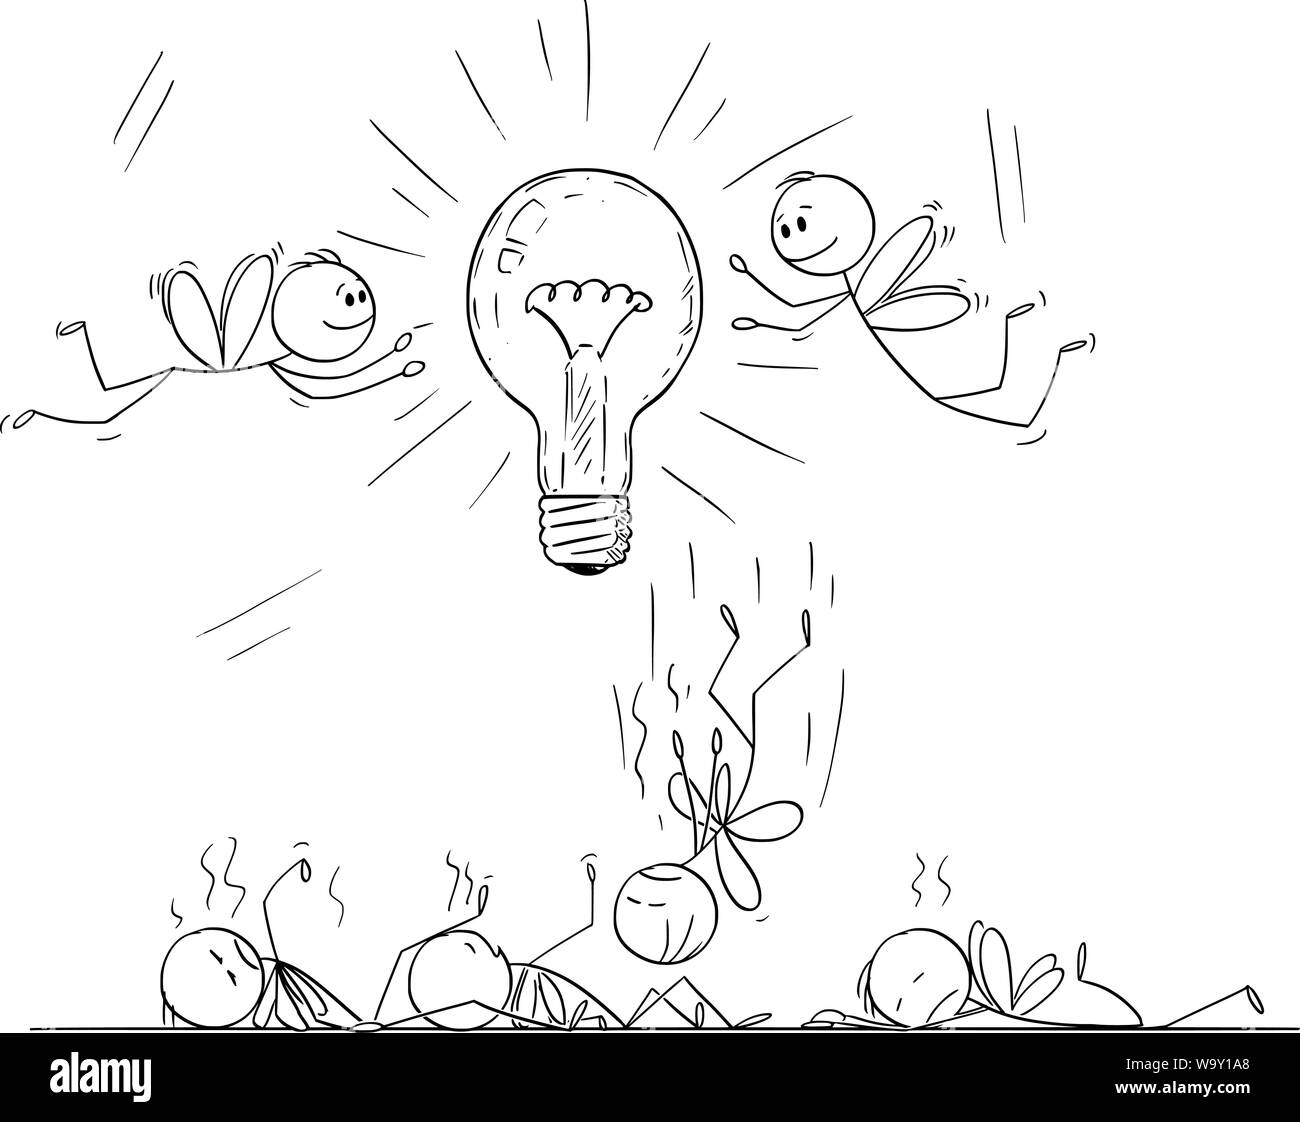 Vector cartoon stick figure drawing conceptual illustration of men or businessmen as flies or moths attracted by light bulb, some flying around and some are dead, killed by glow and heat. Stock Vector